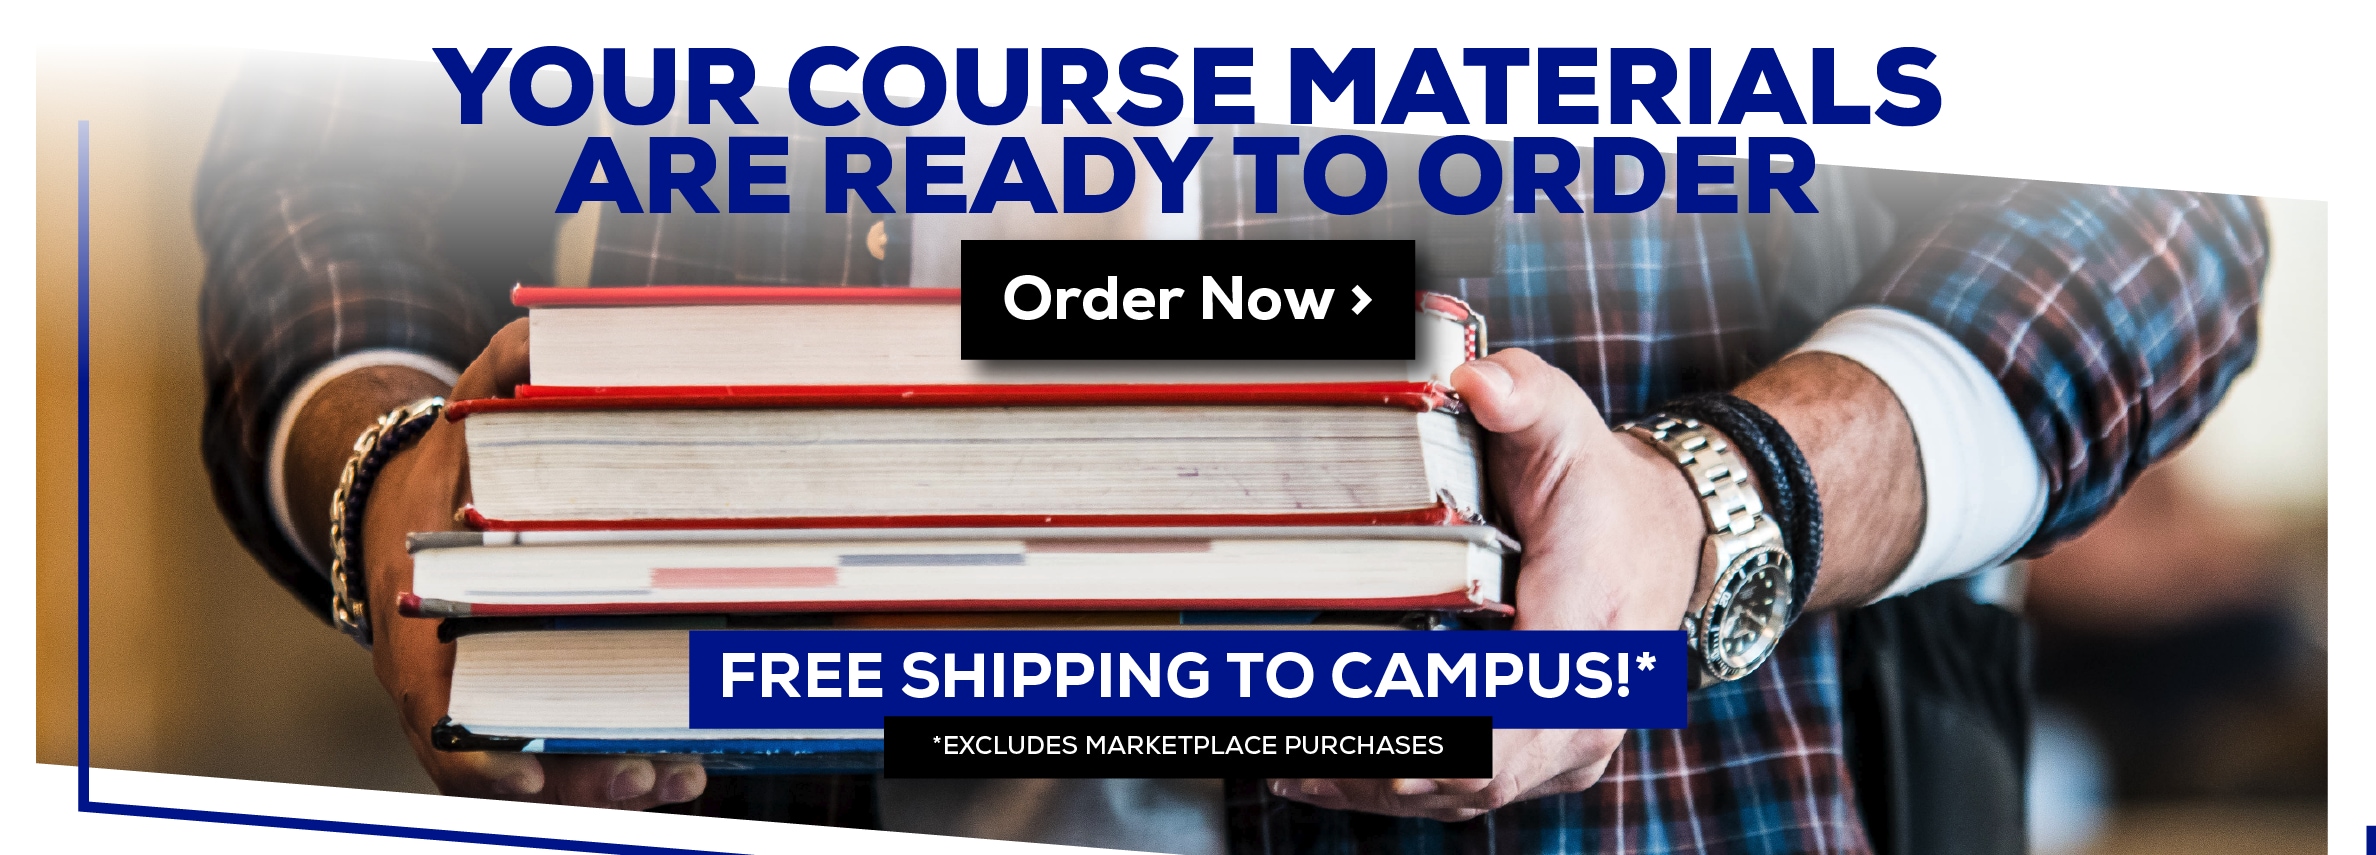 Your Course Materials are Ready to Order. Order Now. Free shipping to campus! *Excludes marketplace purchases.